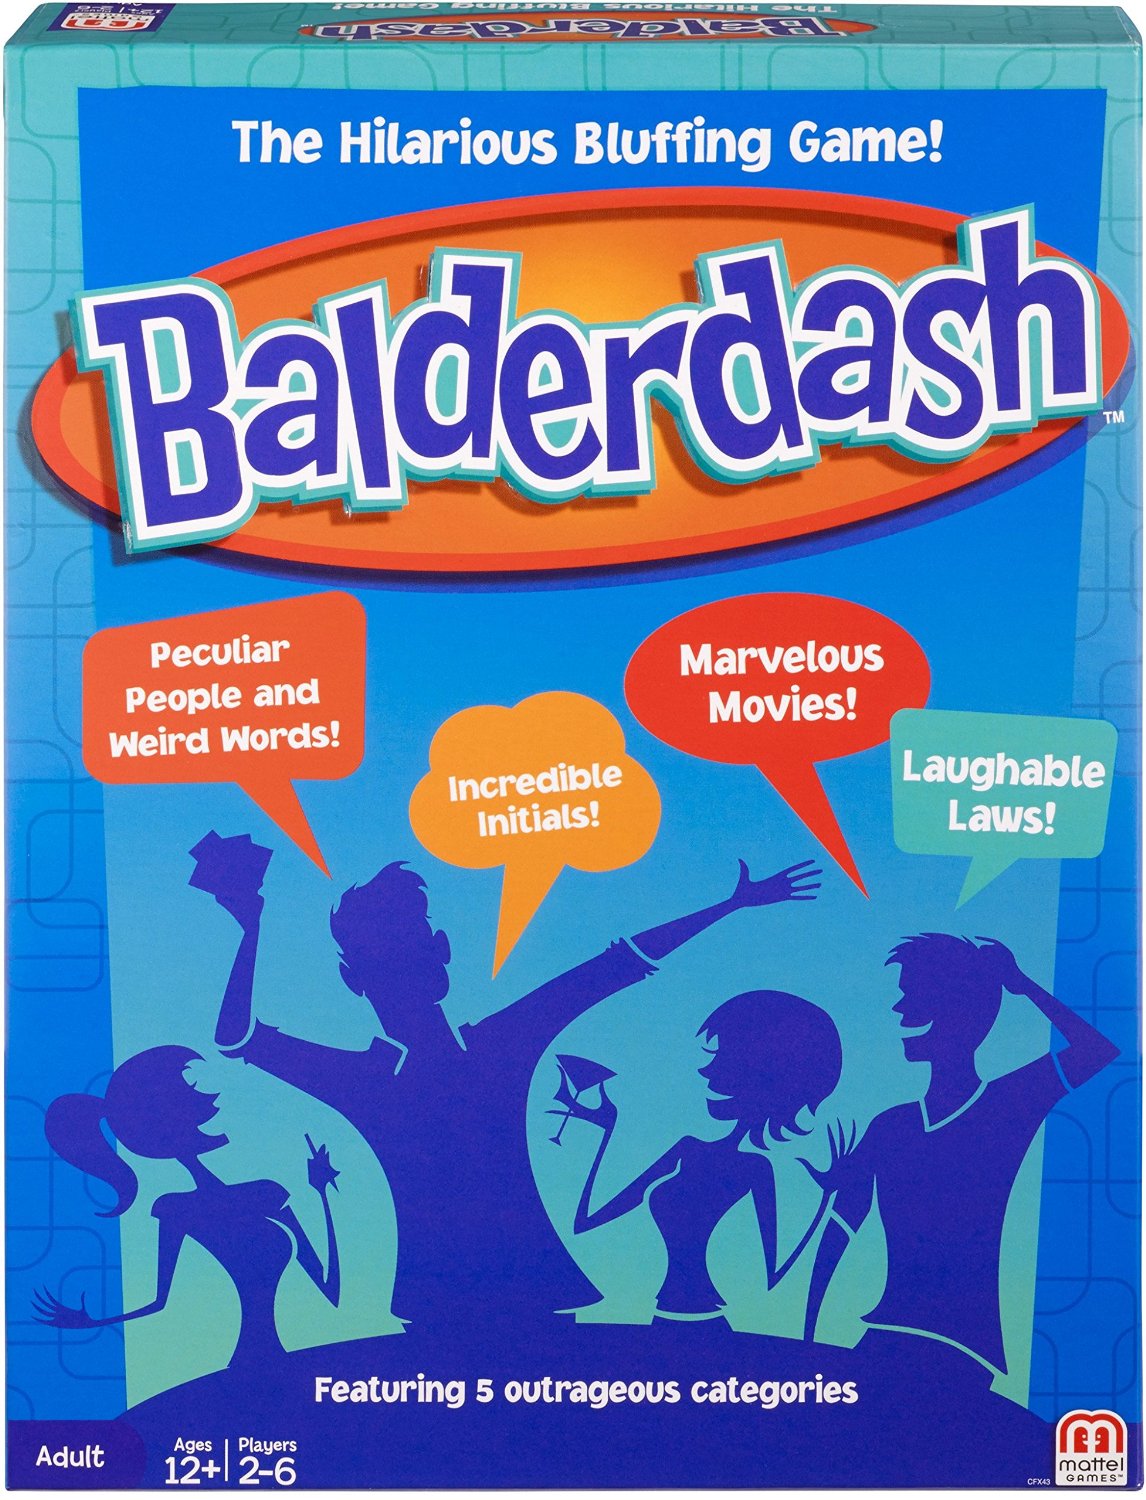 The Hilarious Family Game Balderdash Only $8.97! (Lowest Price We’ve Seen!)